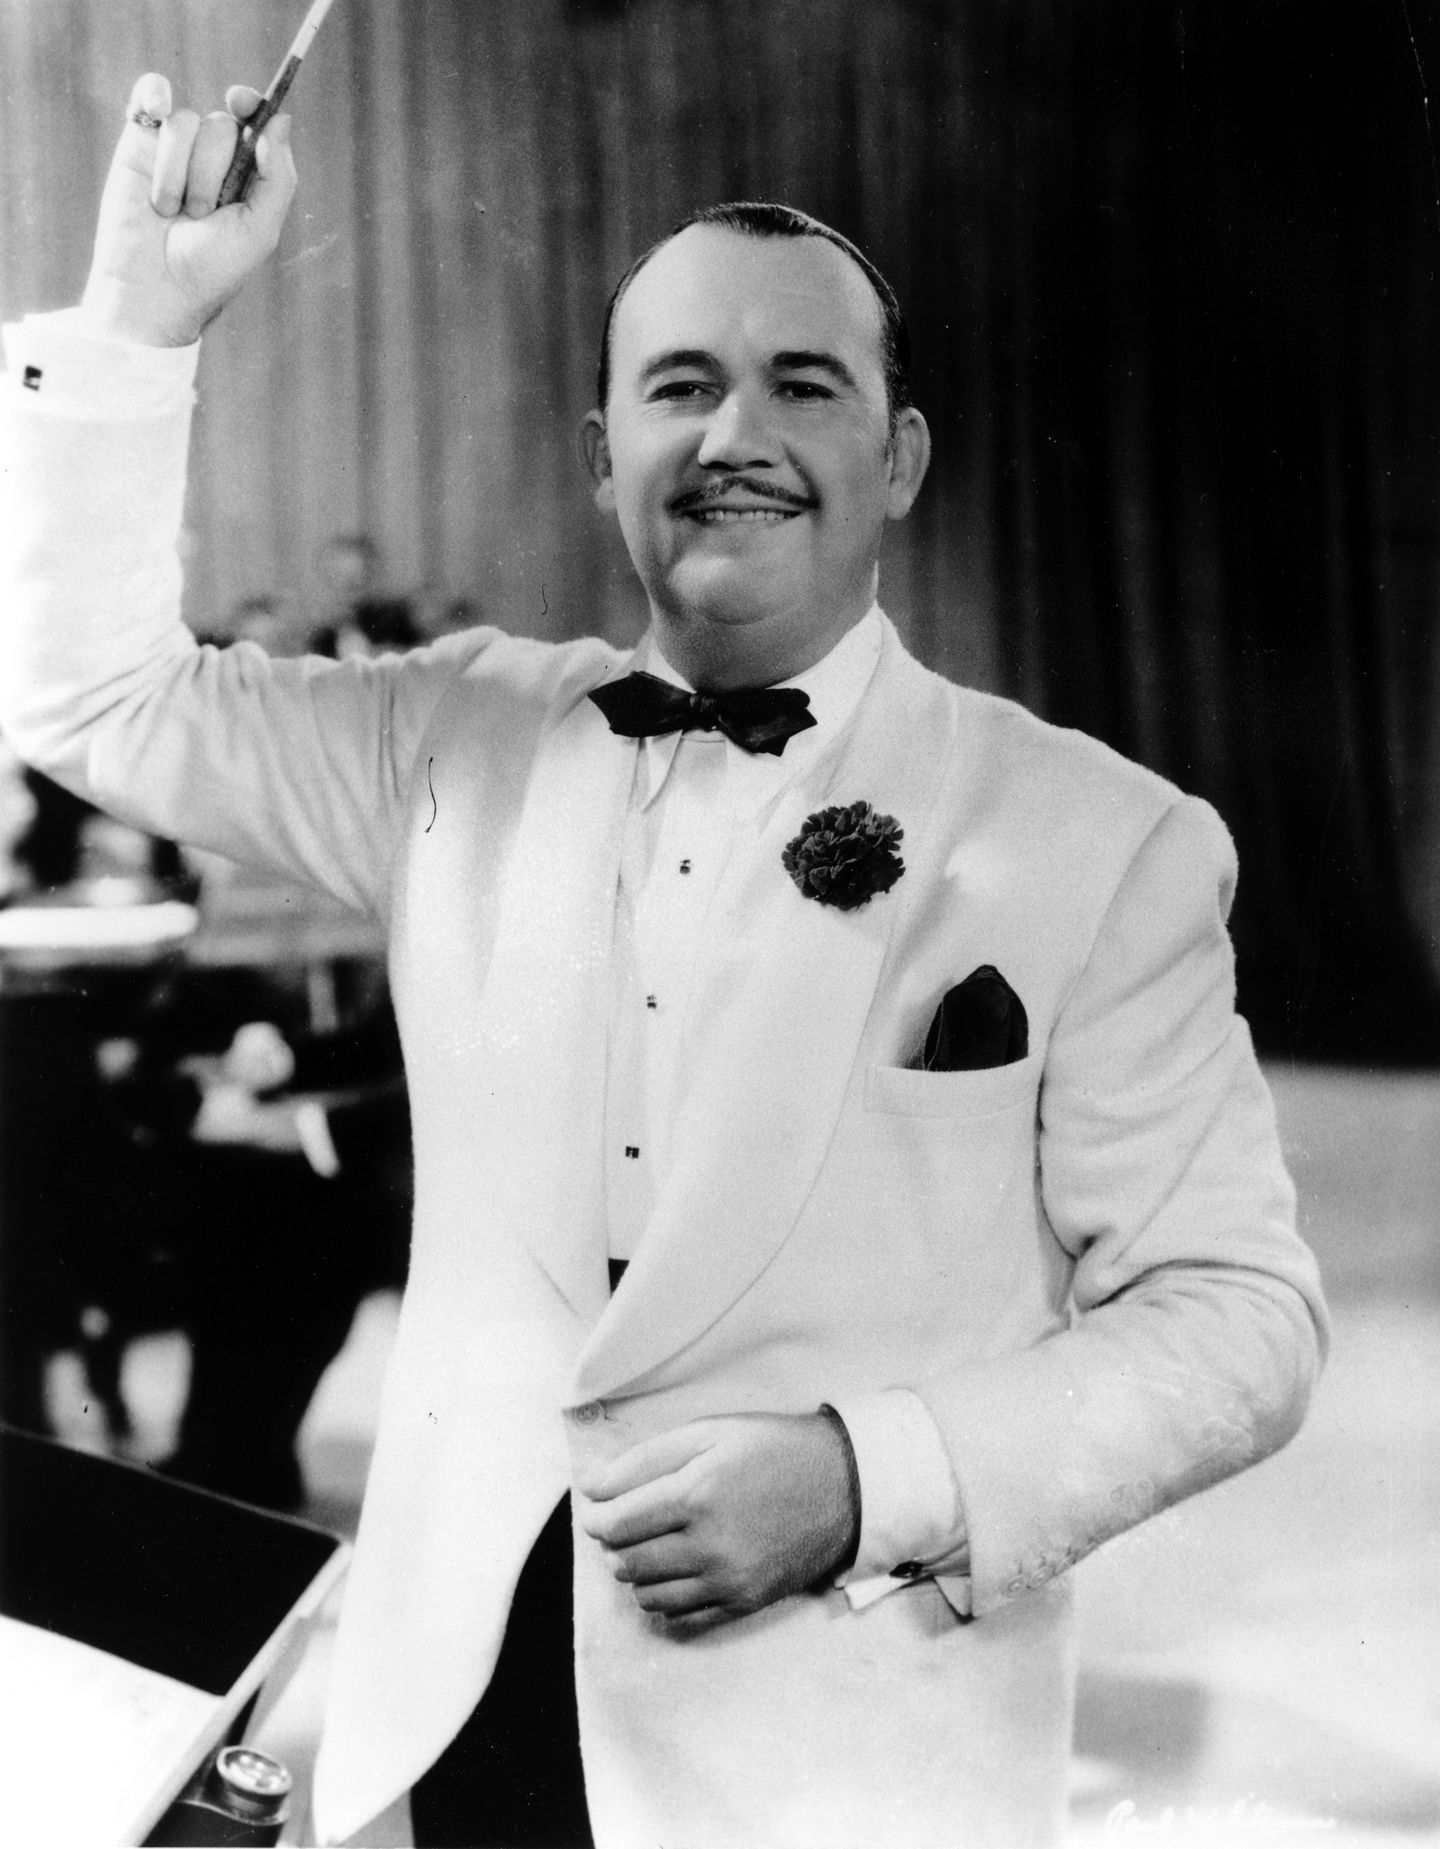 paul whiteman, considered the king of jazz by some, and hated by others